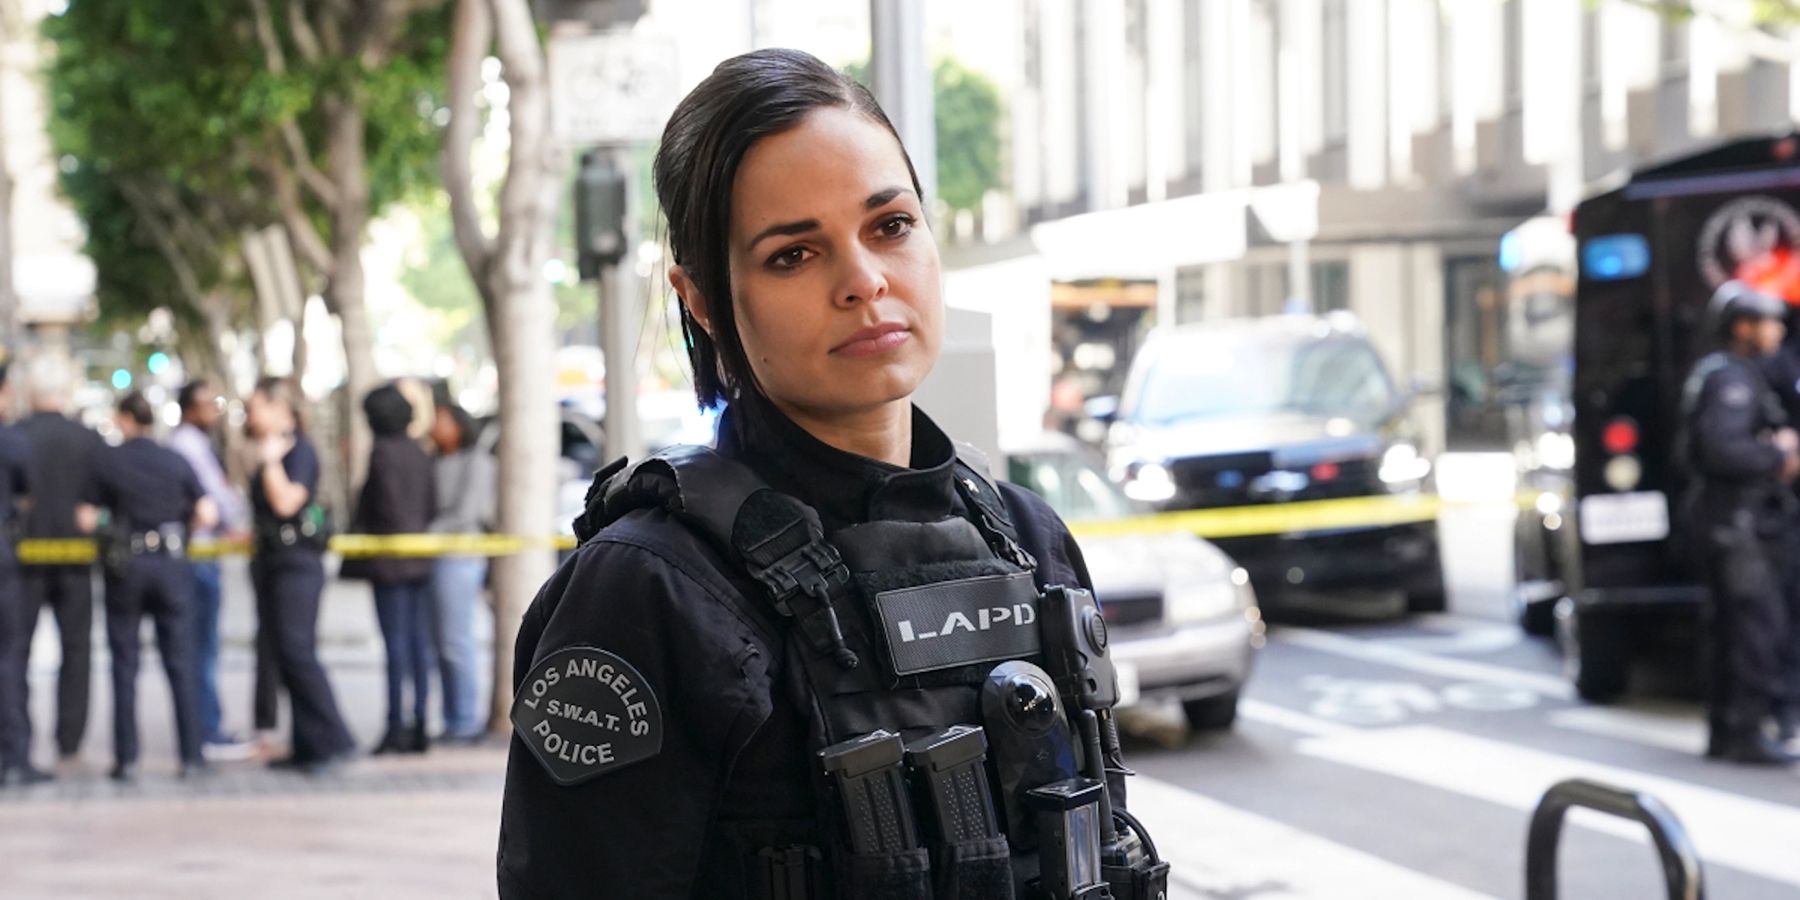 How S.W.A.T.'s Season 4 Finale Set Up Hondo, Chris And Street For Season 5